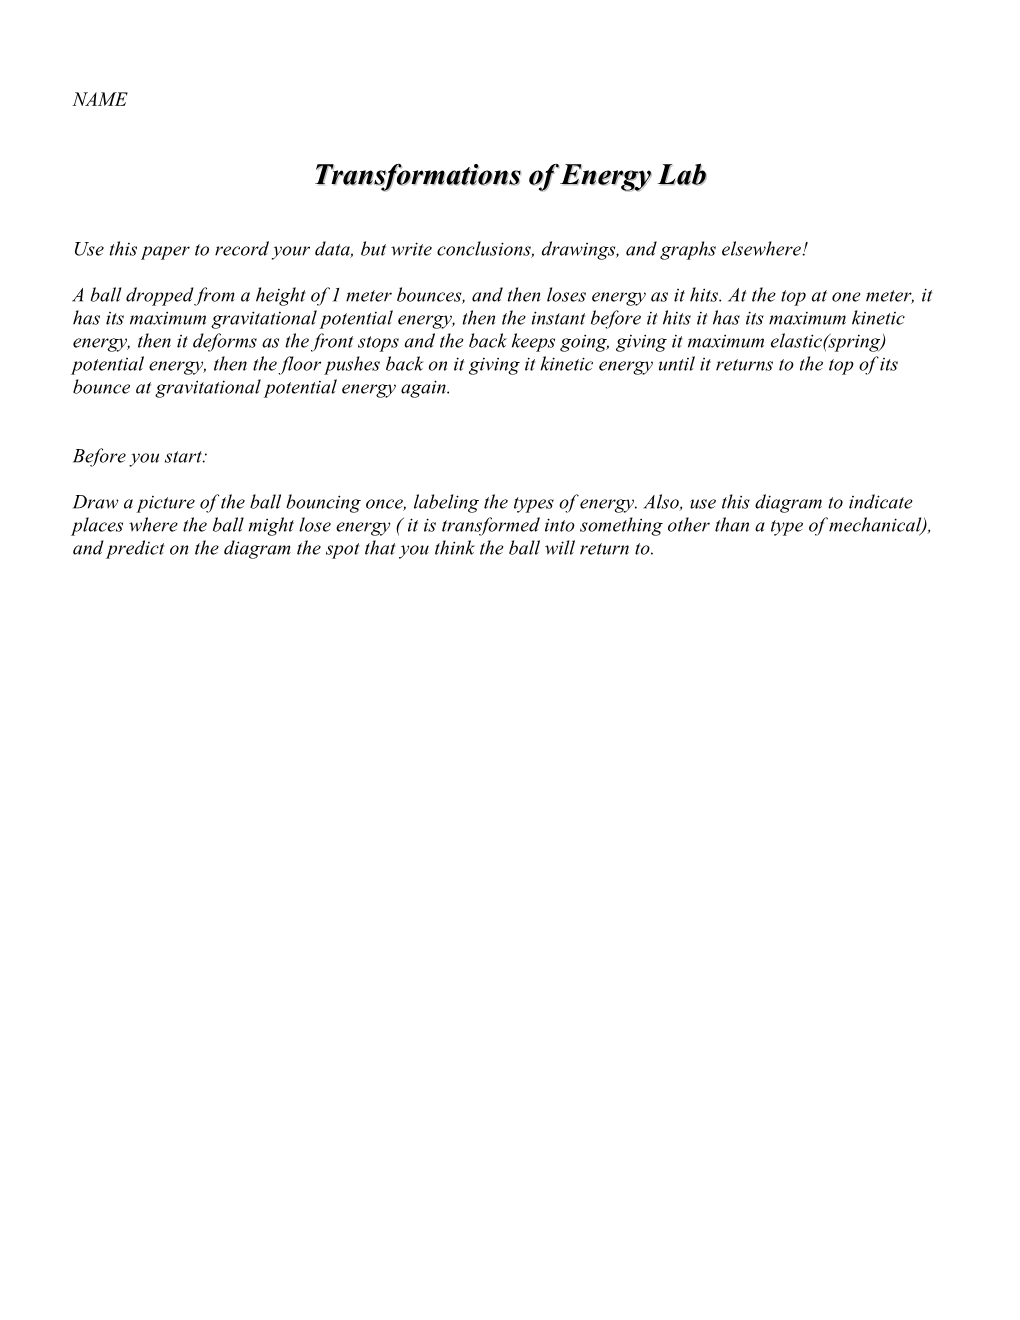 Transformations of Energy Lab